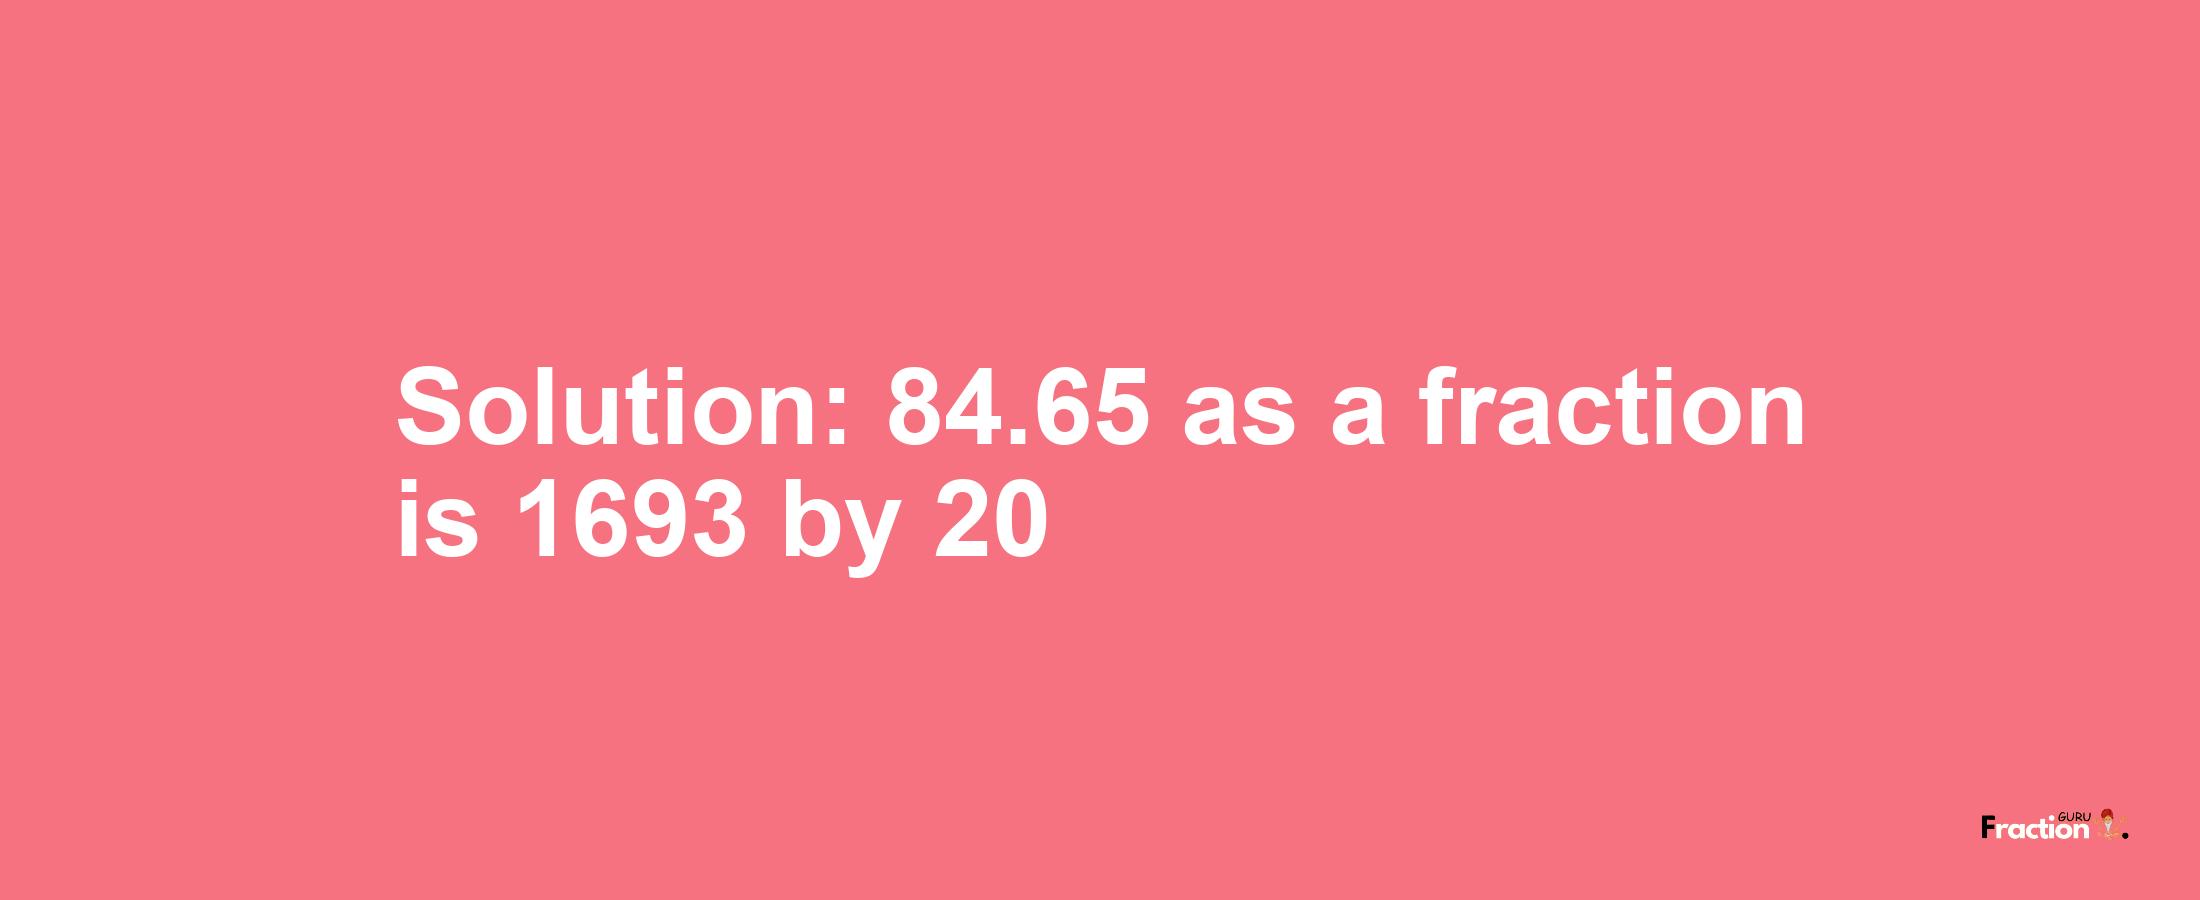 Solution:84.65 as a fraction is 1693/20